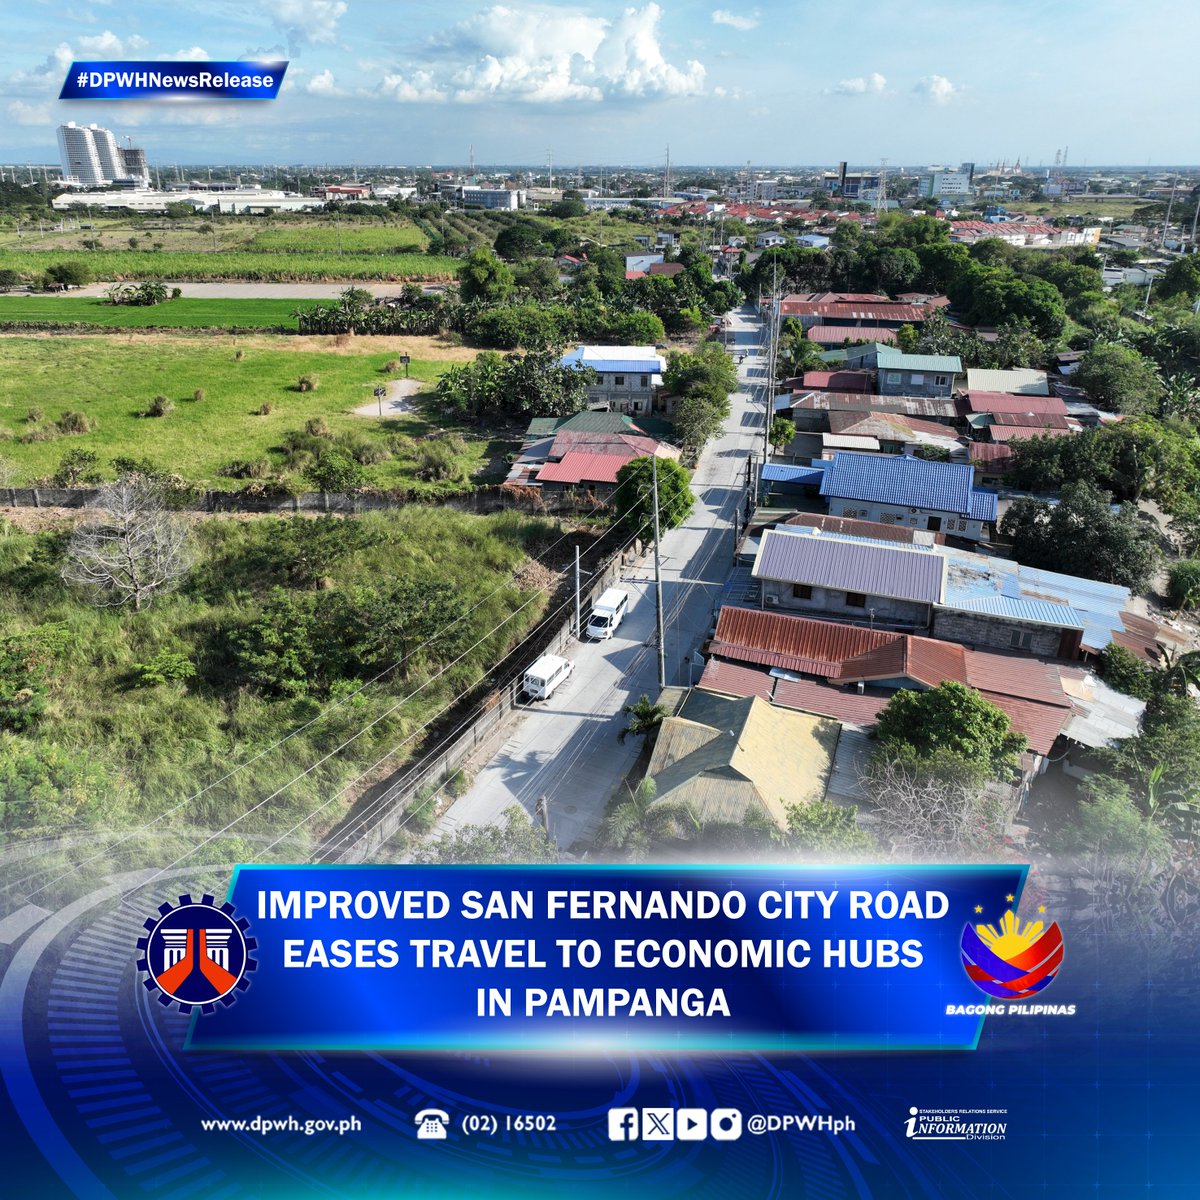 Improved San Fernando City Road Eases Travel to Economic Hubs in Pampanga | Full Story: dpwh.gov.ph/dpwh/news/33426 #DPWH #BuildBetterMore #BagongPilipinas